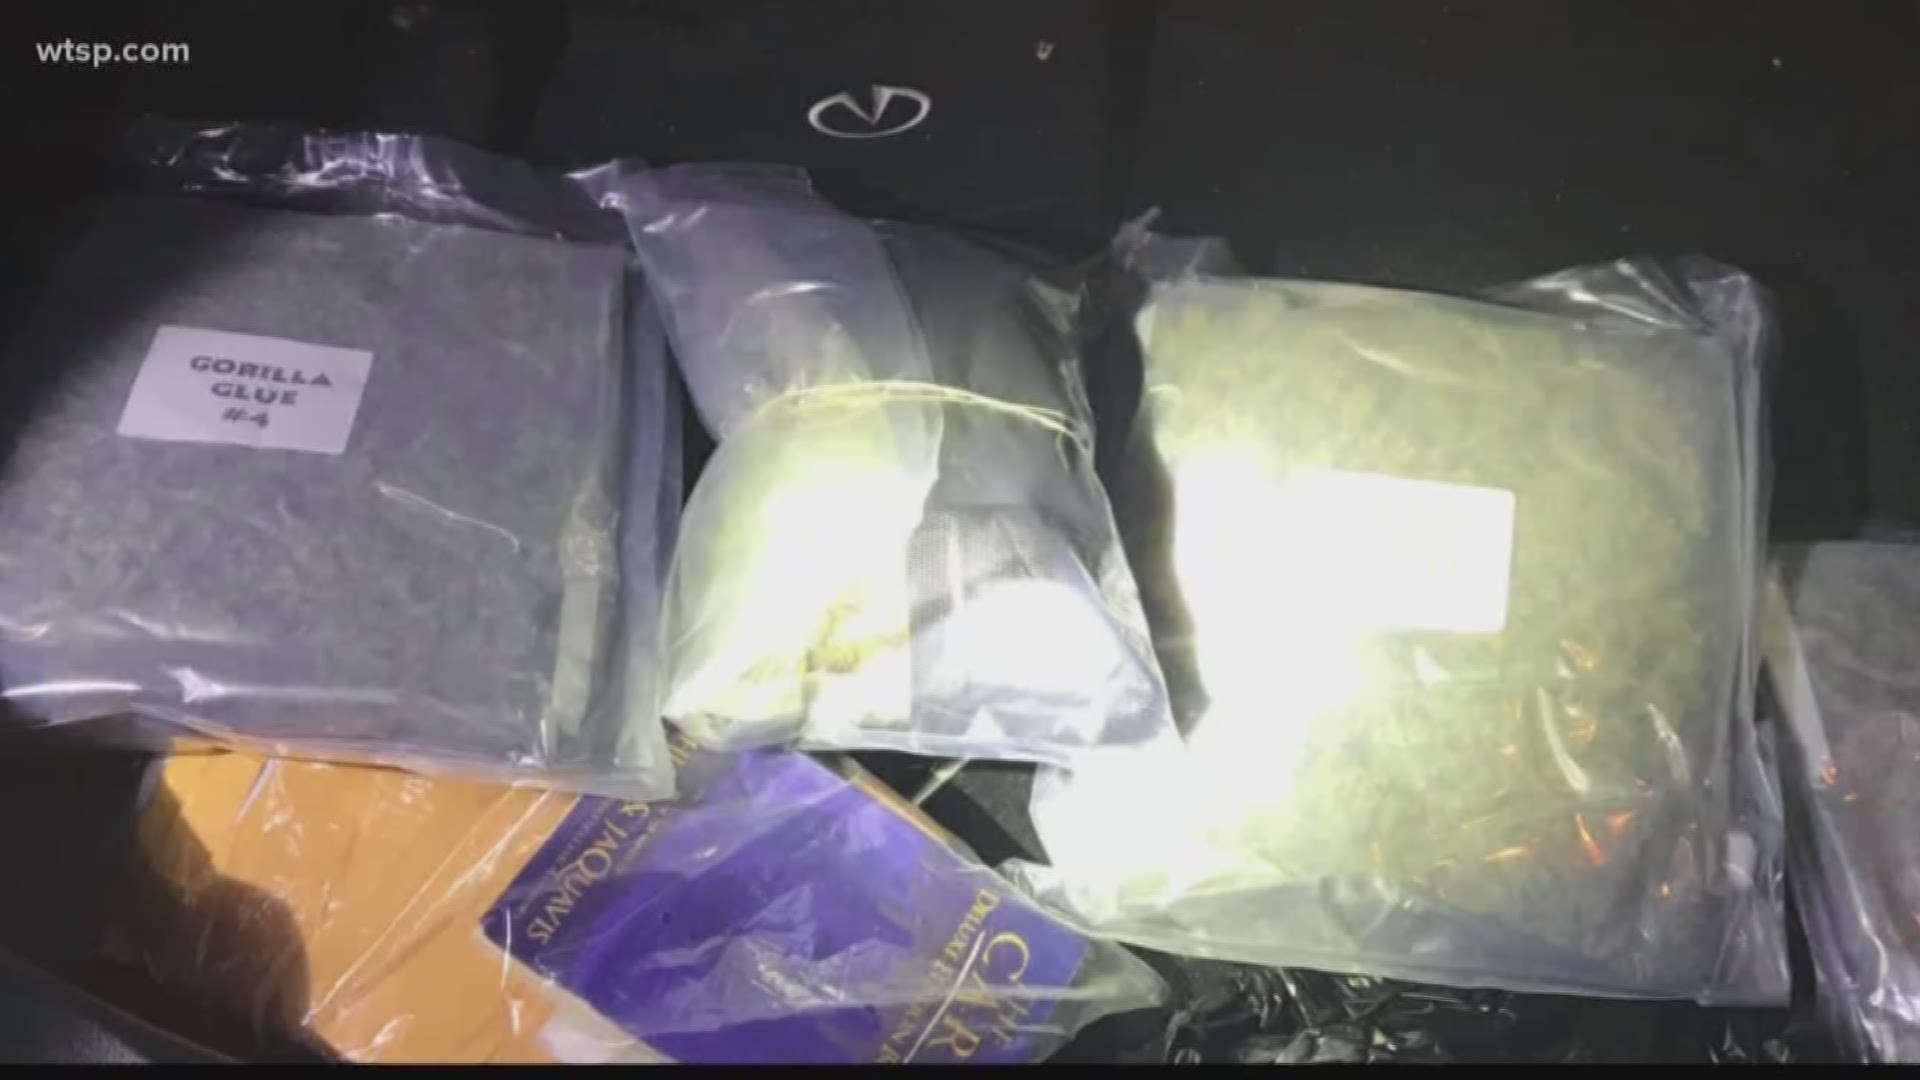 A Hillsborough County deputy was in for quite a surprise when he pulled over a man who drove through a stop sign. He said he found a large bag full of drugs inside the car.